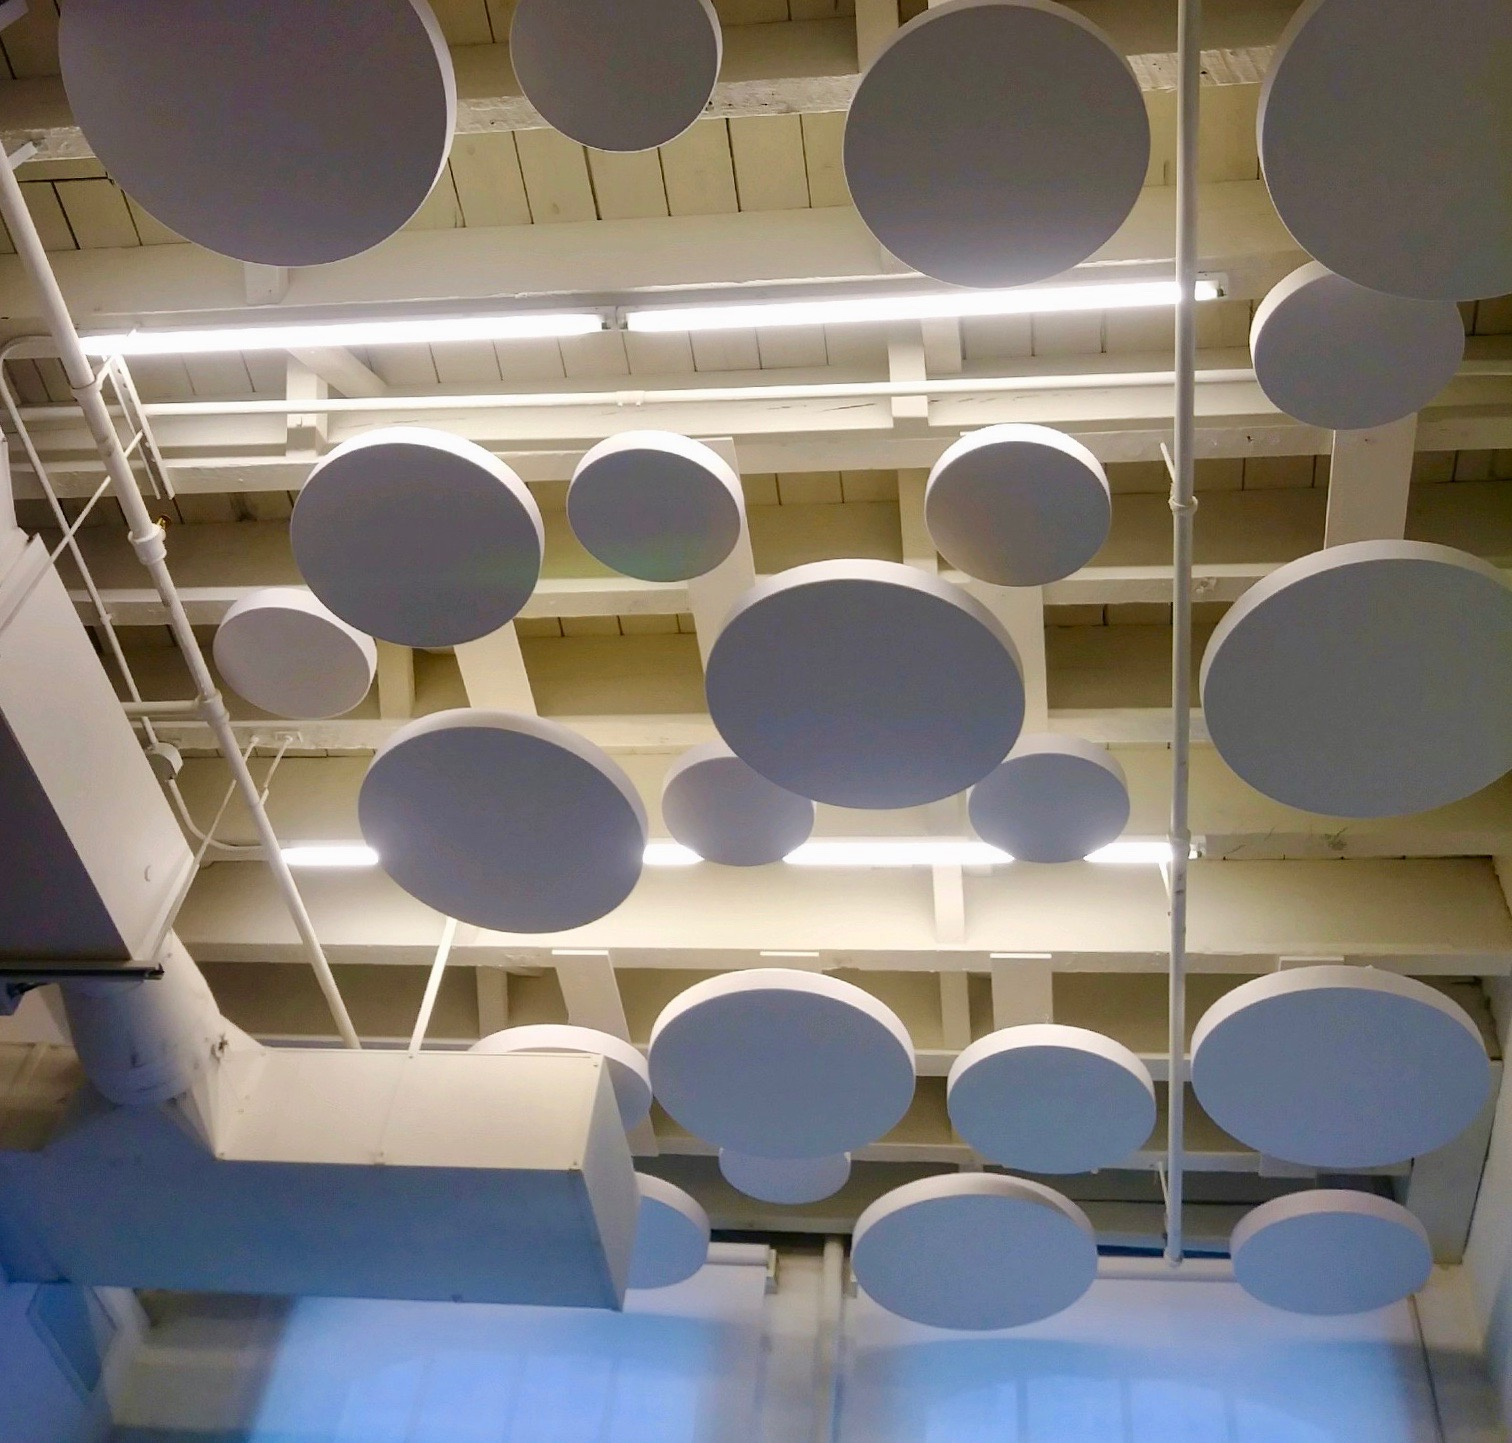 Circular Acoustic Clouds in Conference Room